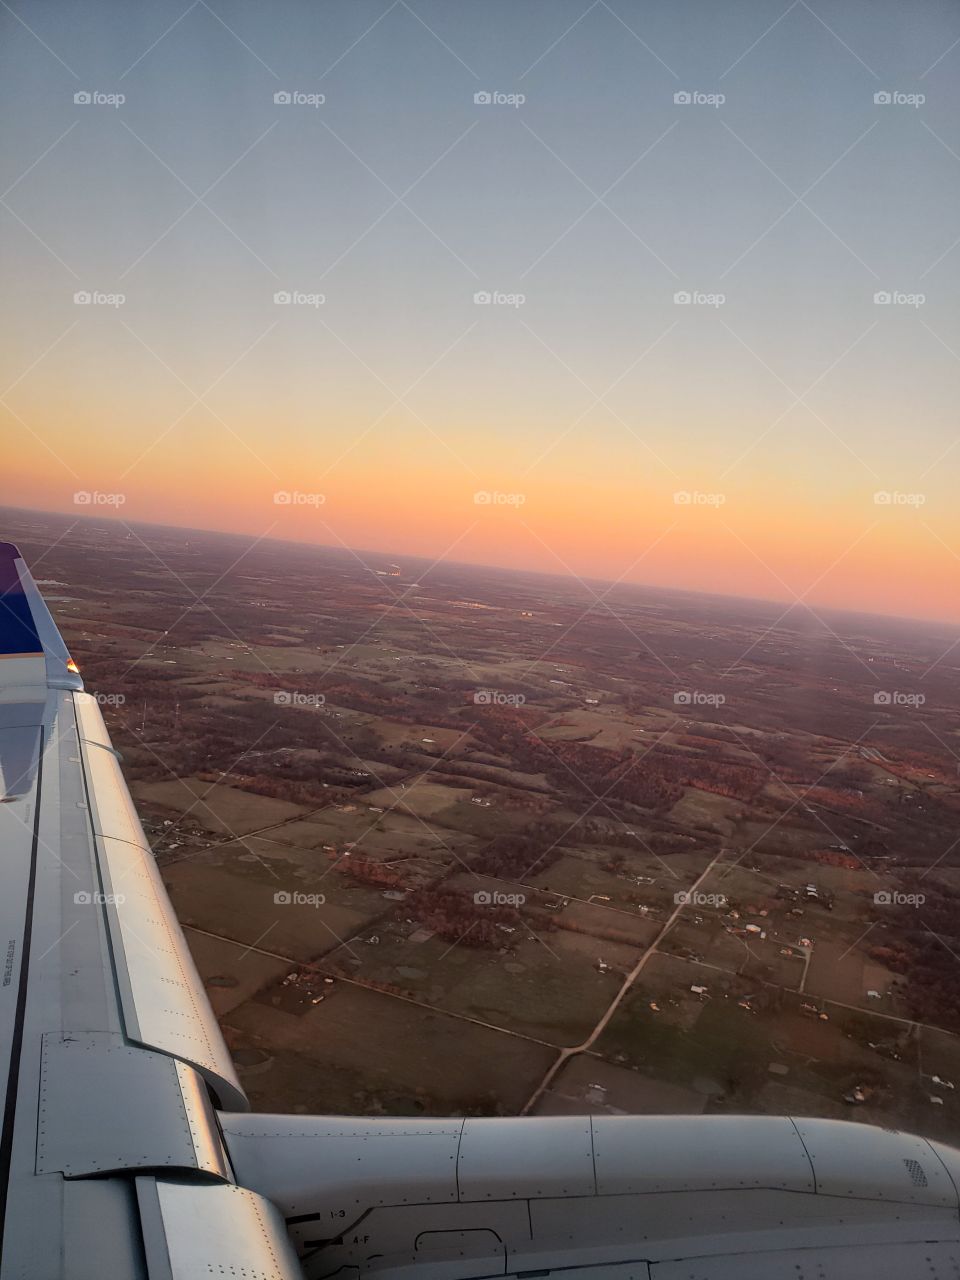 sunset over country from airplane